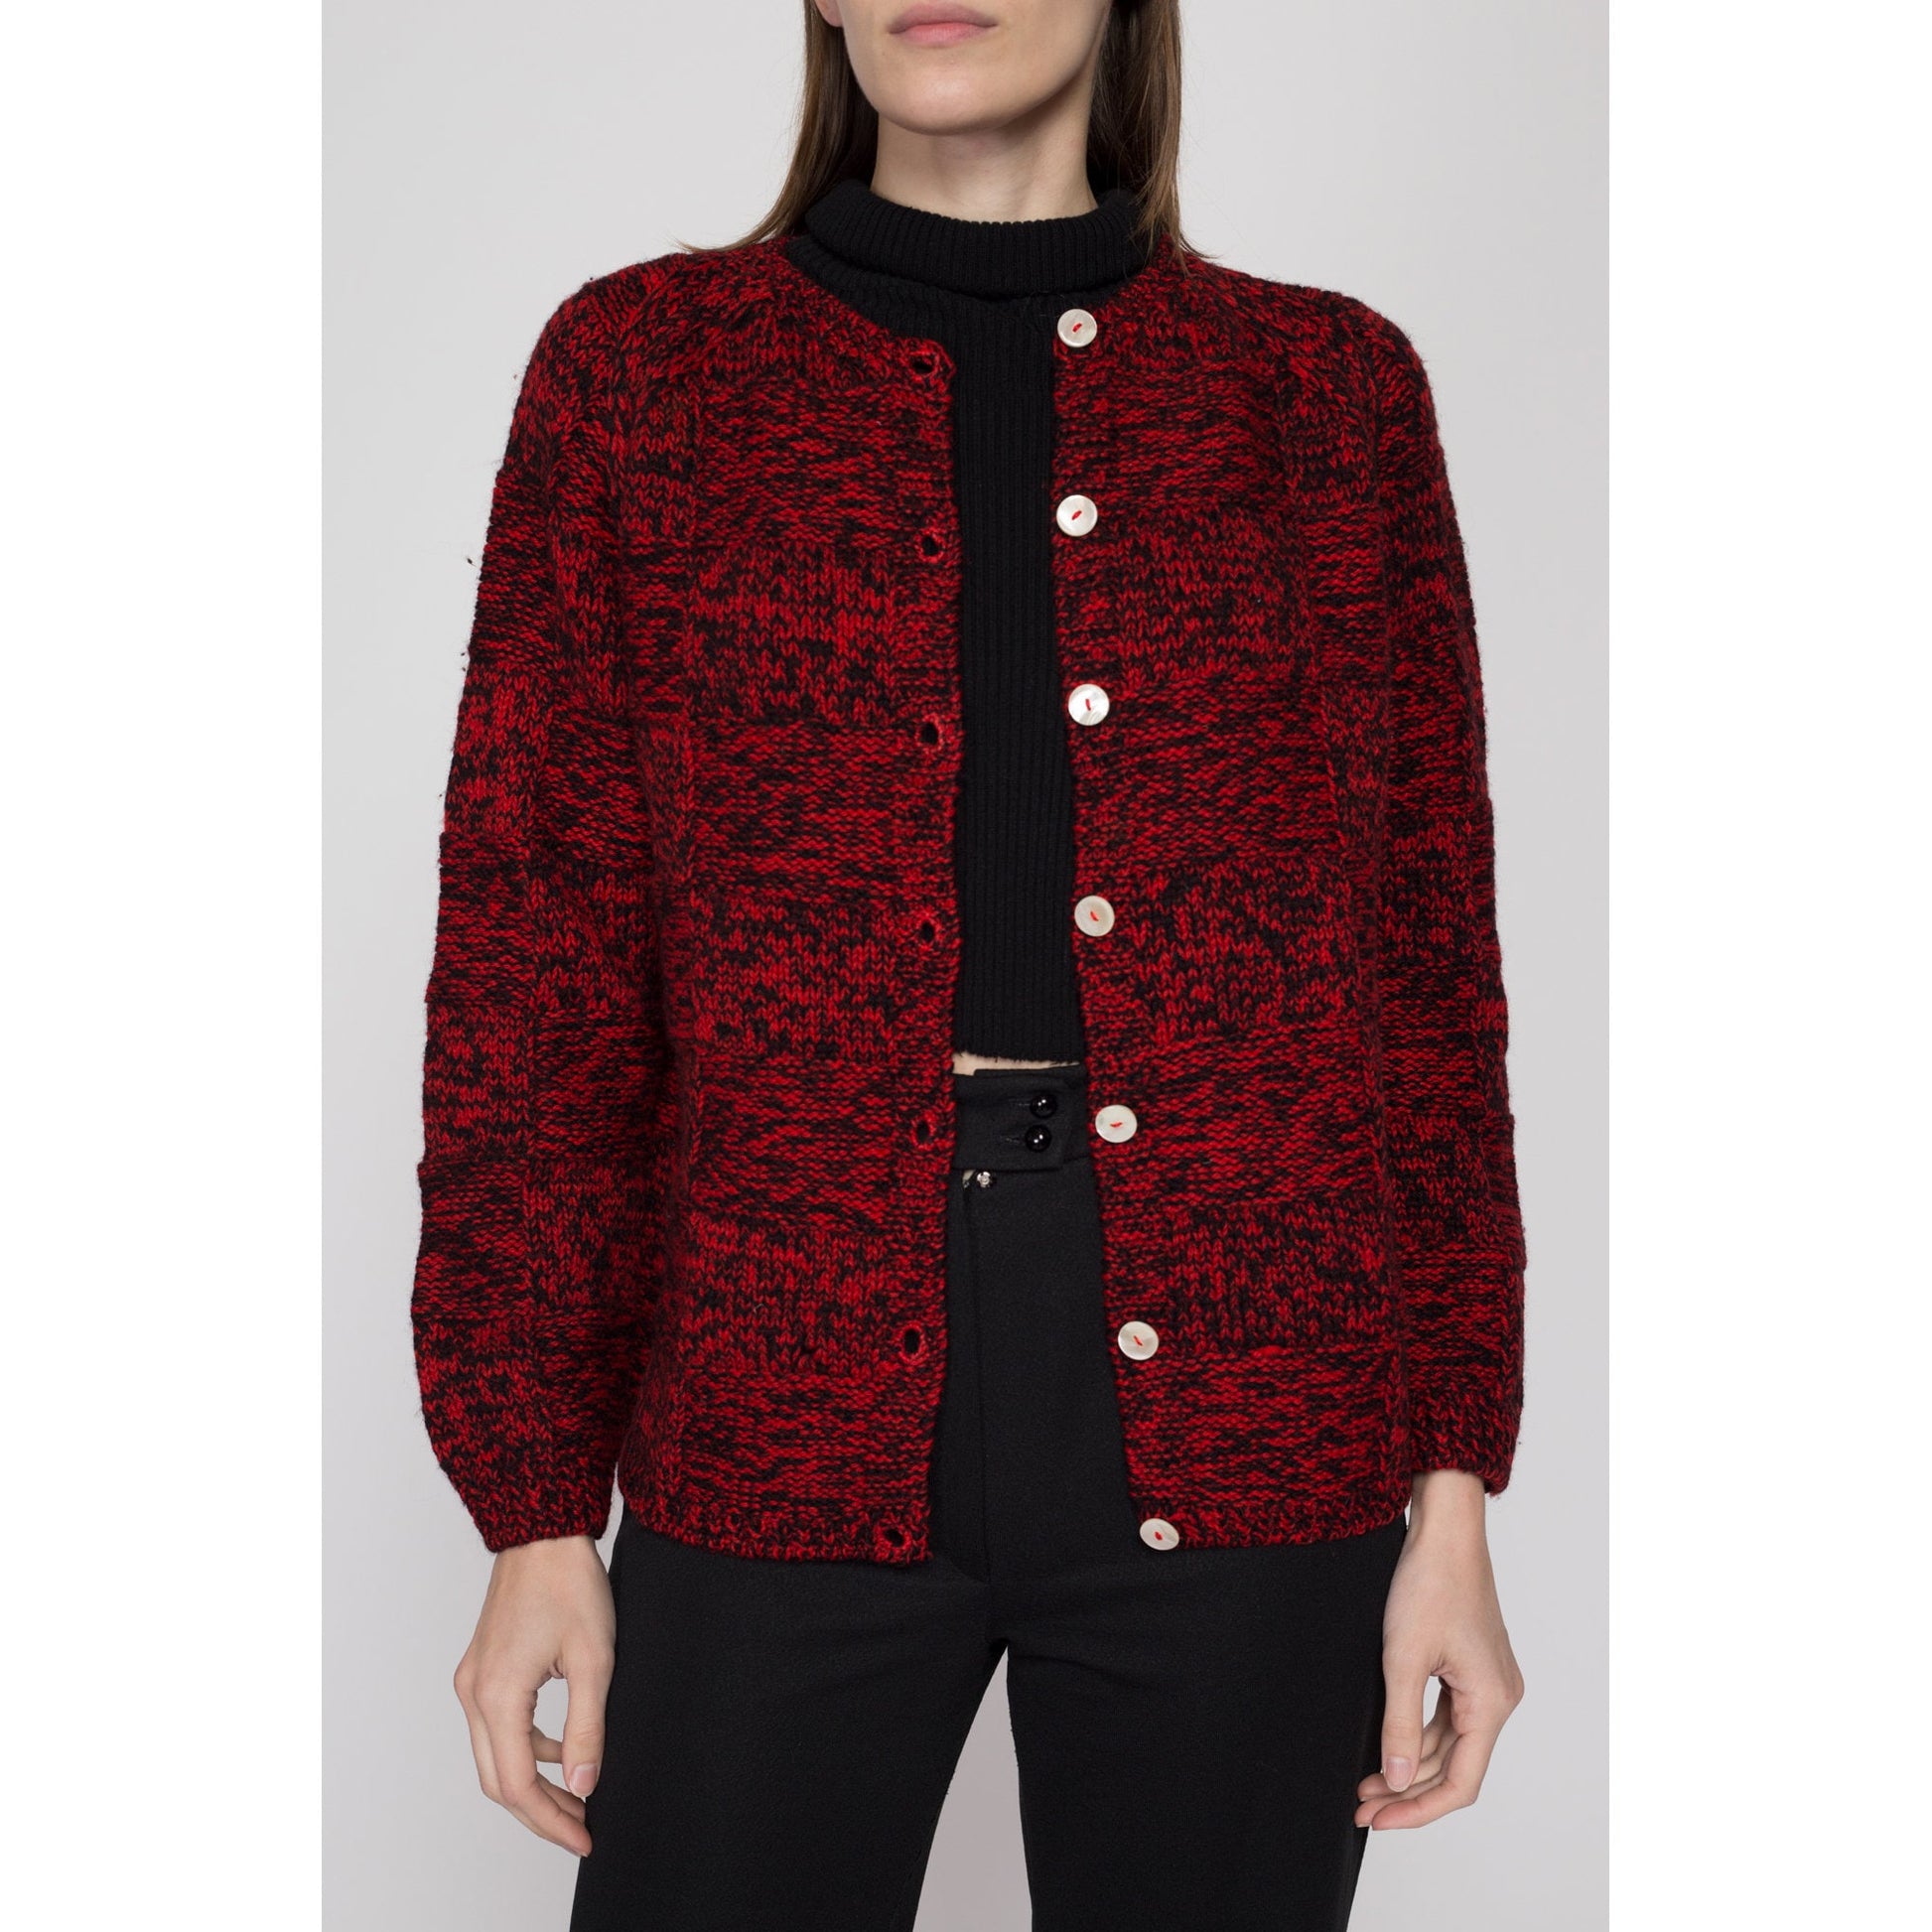 Medium 60s Saks Fifth Avenue Red & Black Marled Wool Cardigan | Vintage Made In Italy Knit Button Up Sweater